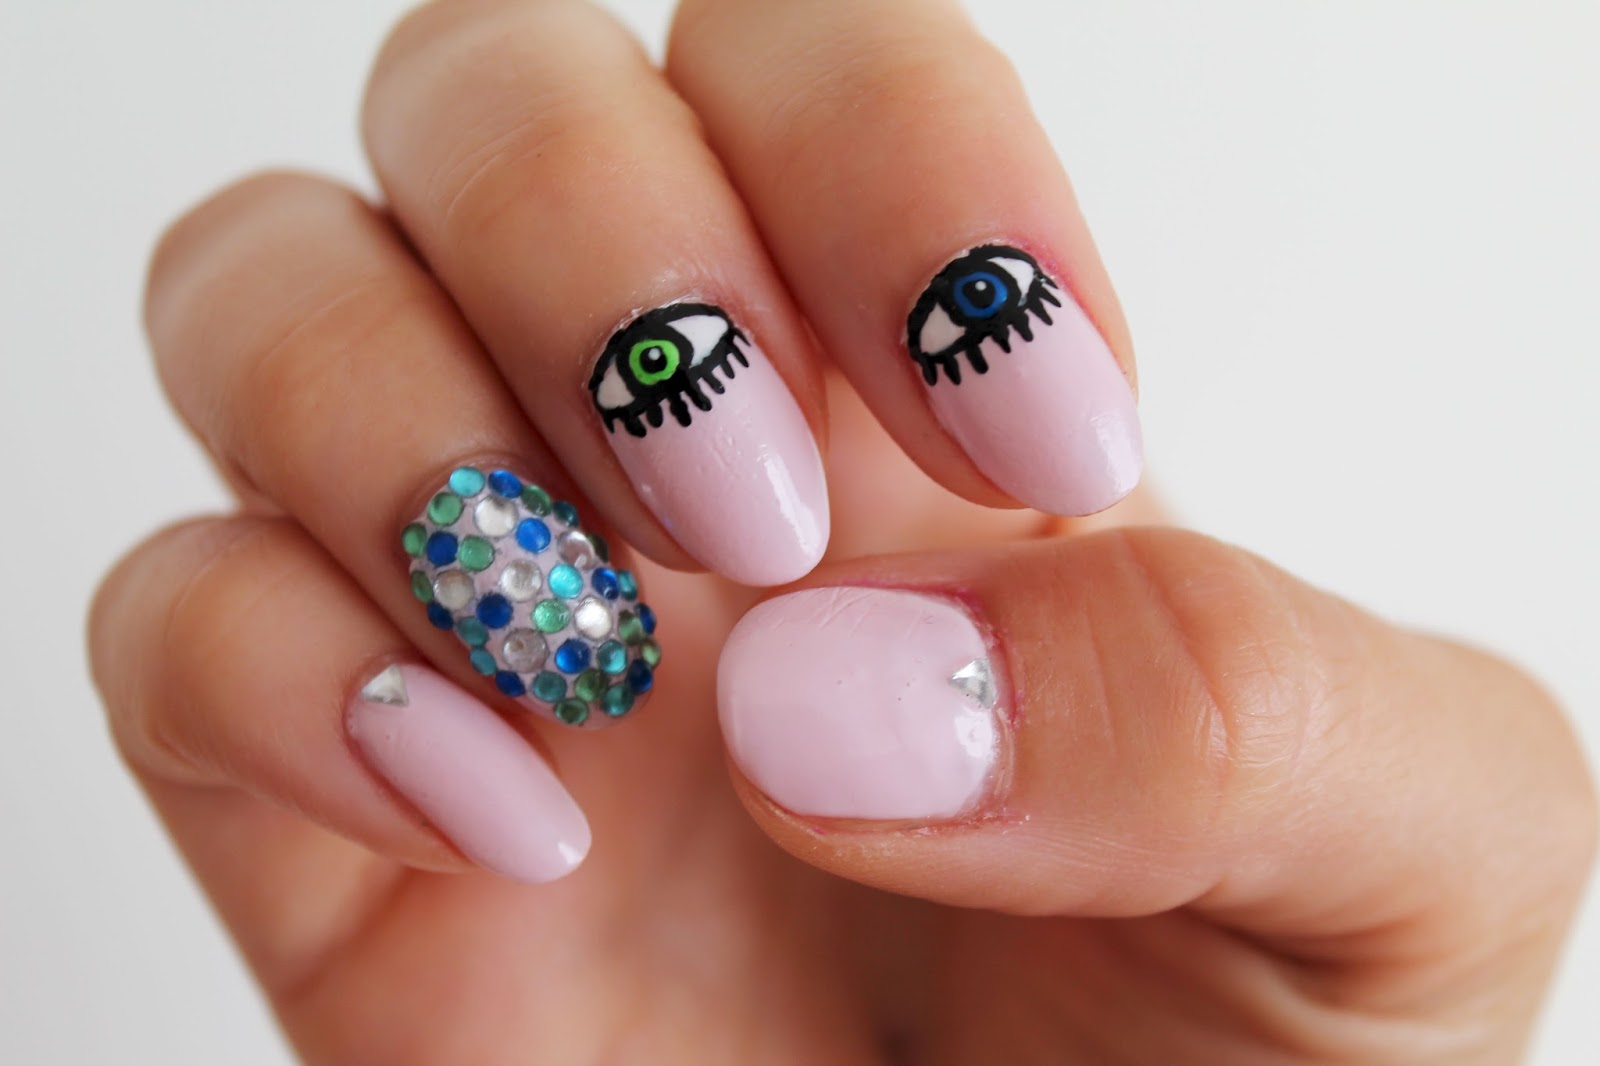 5. "Incorporating the Evil Eye Symbol into Your Nail Art" - wide 2